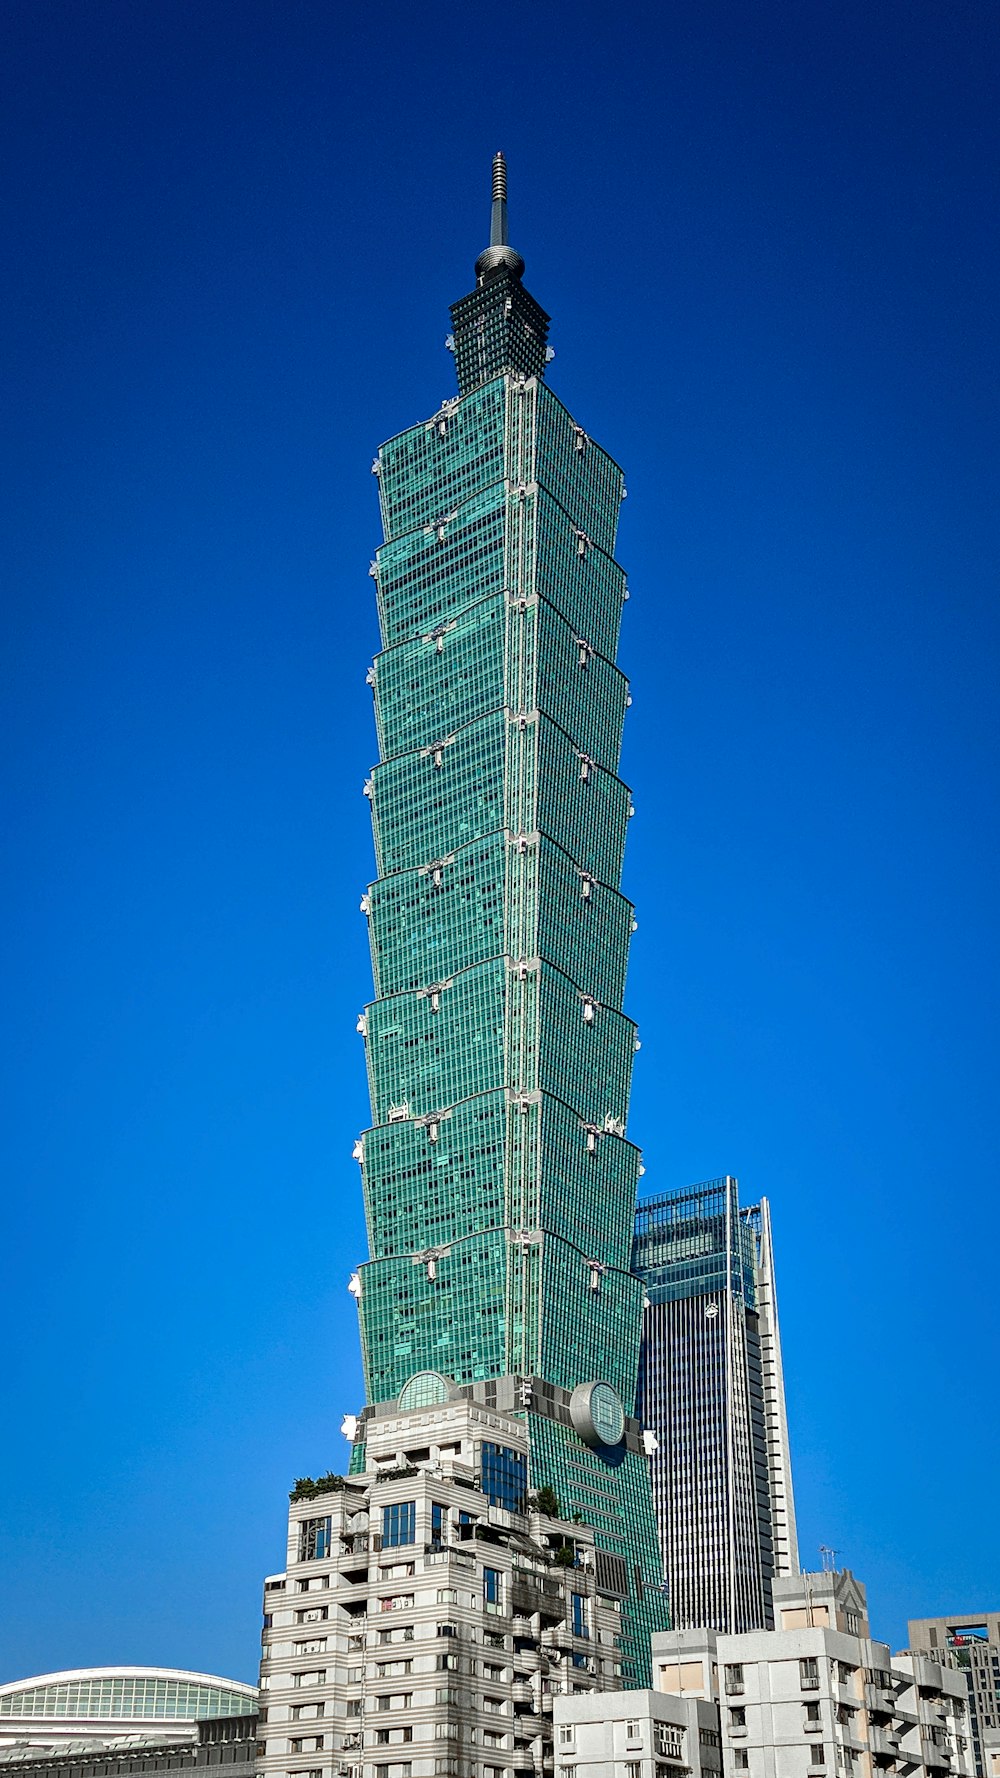 green and white high rise building under blue sky during daytime